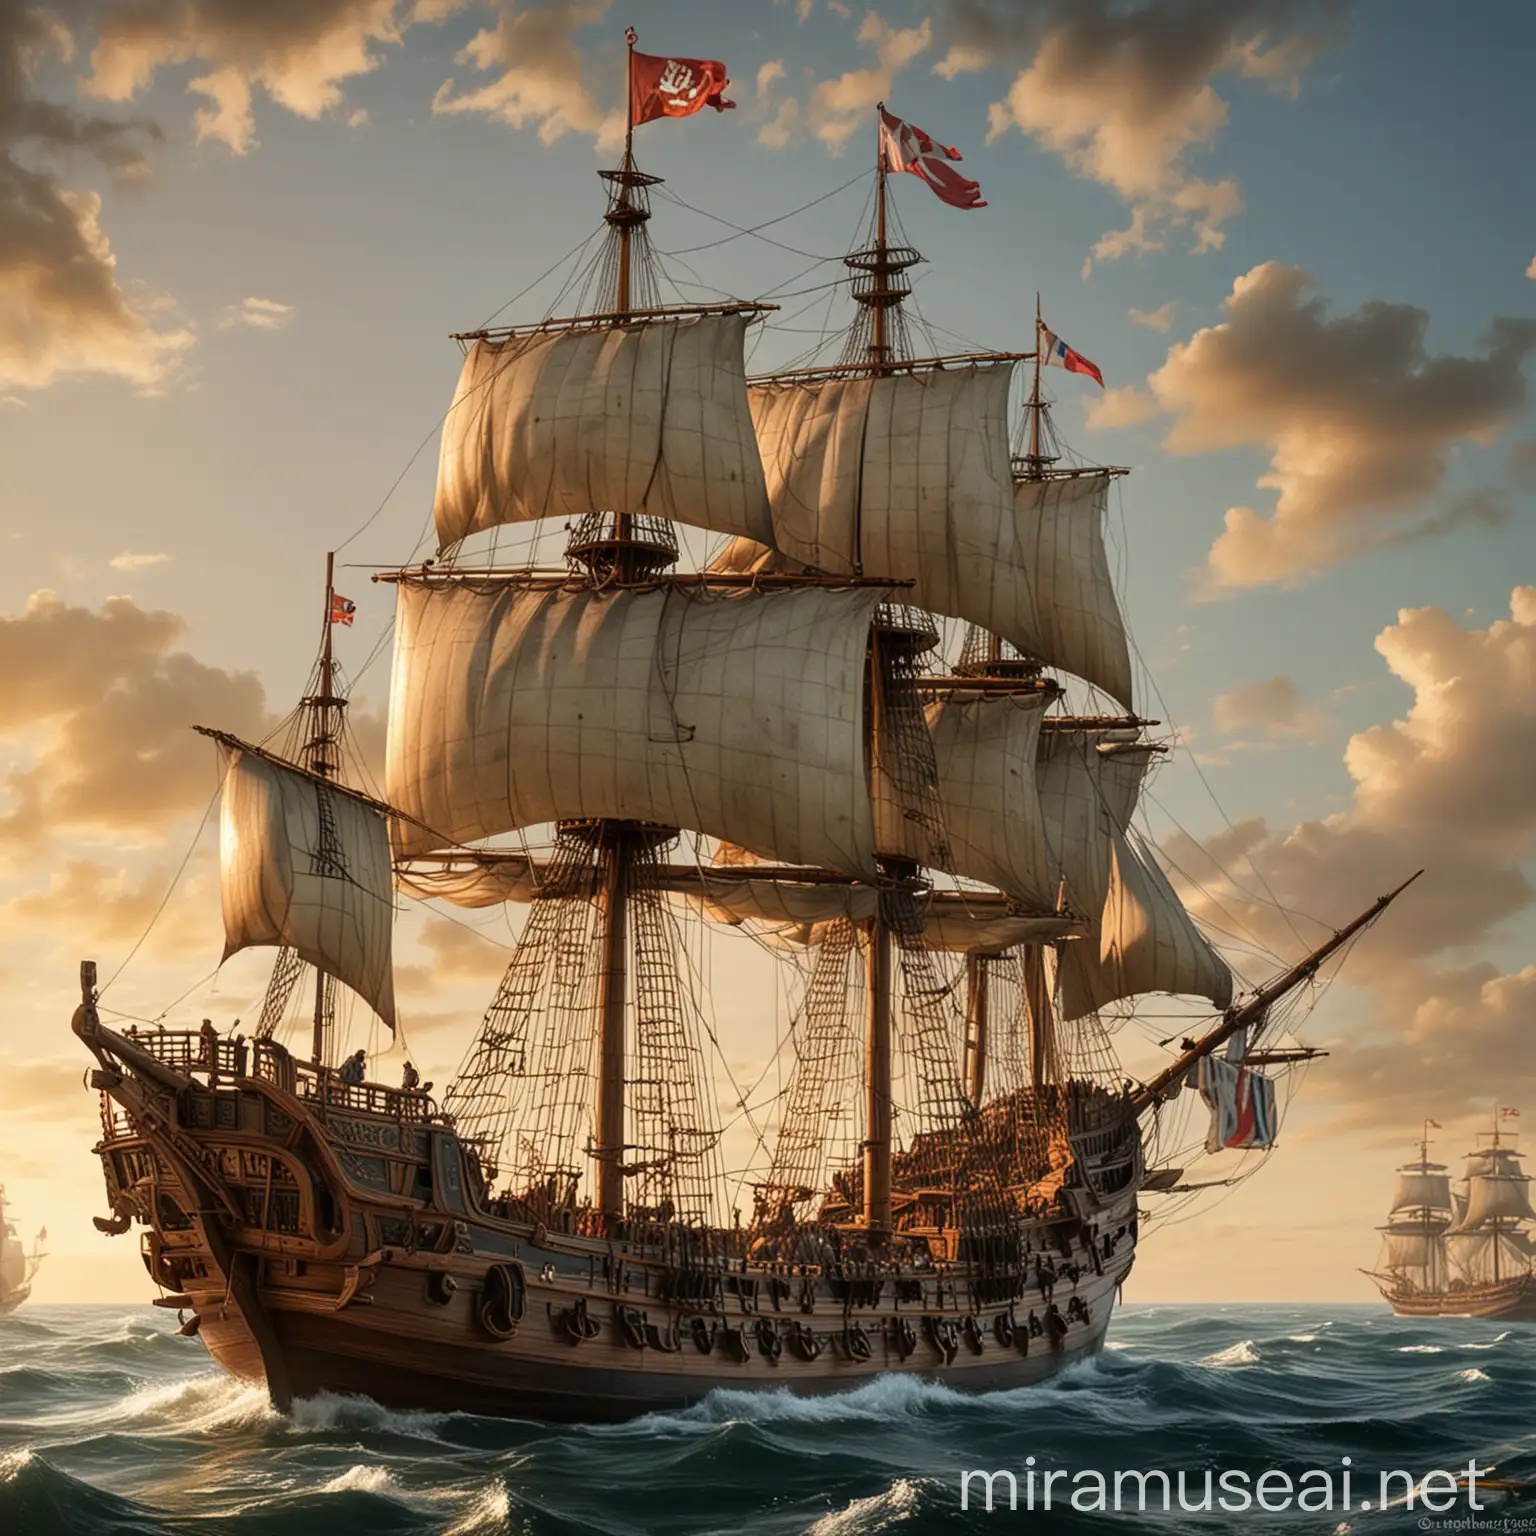 generate me an image for book cover name :THE CARAVEL A Maritime Revolution